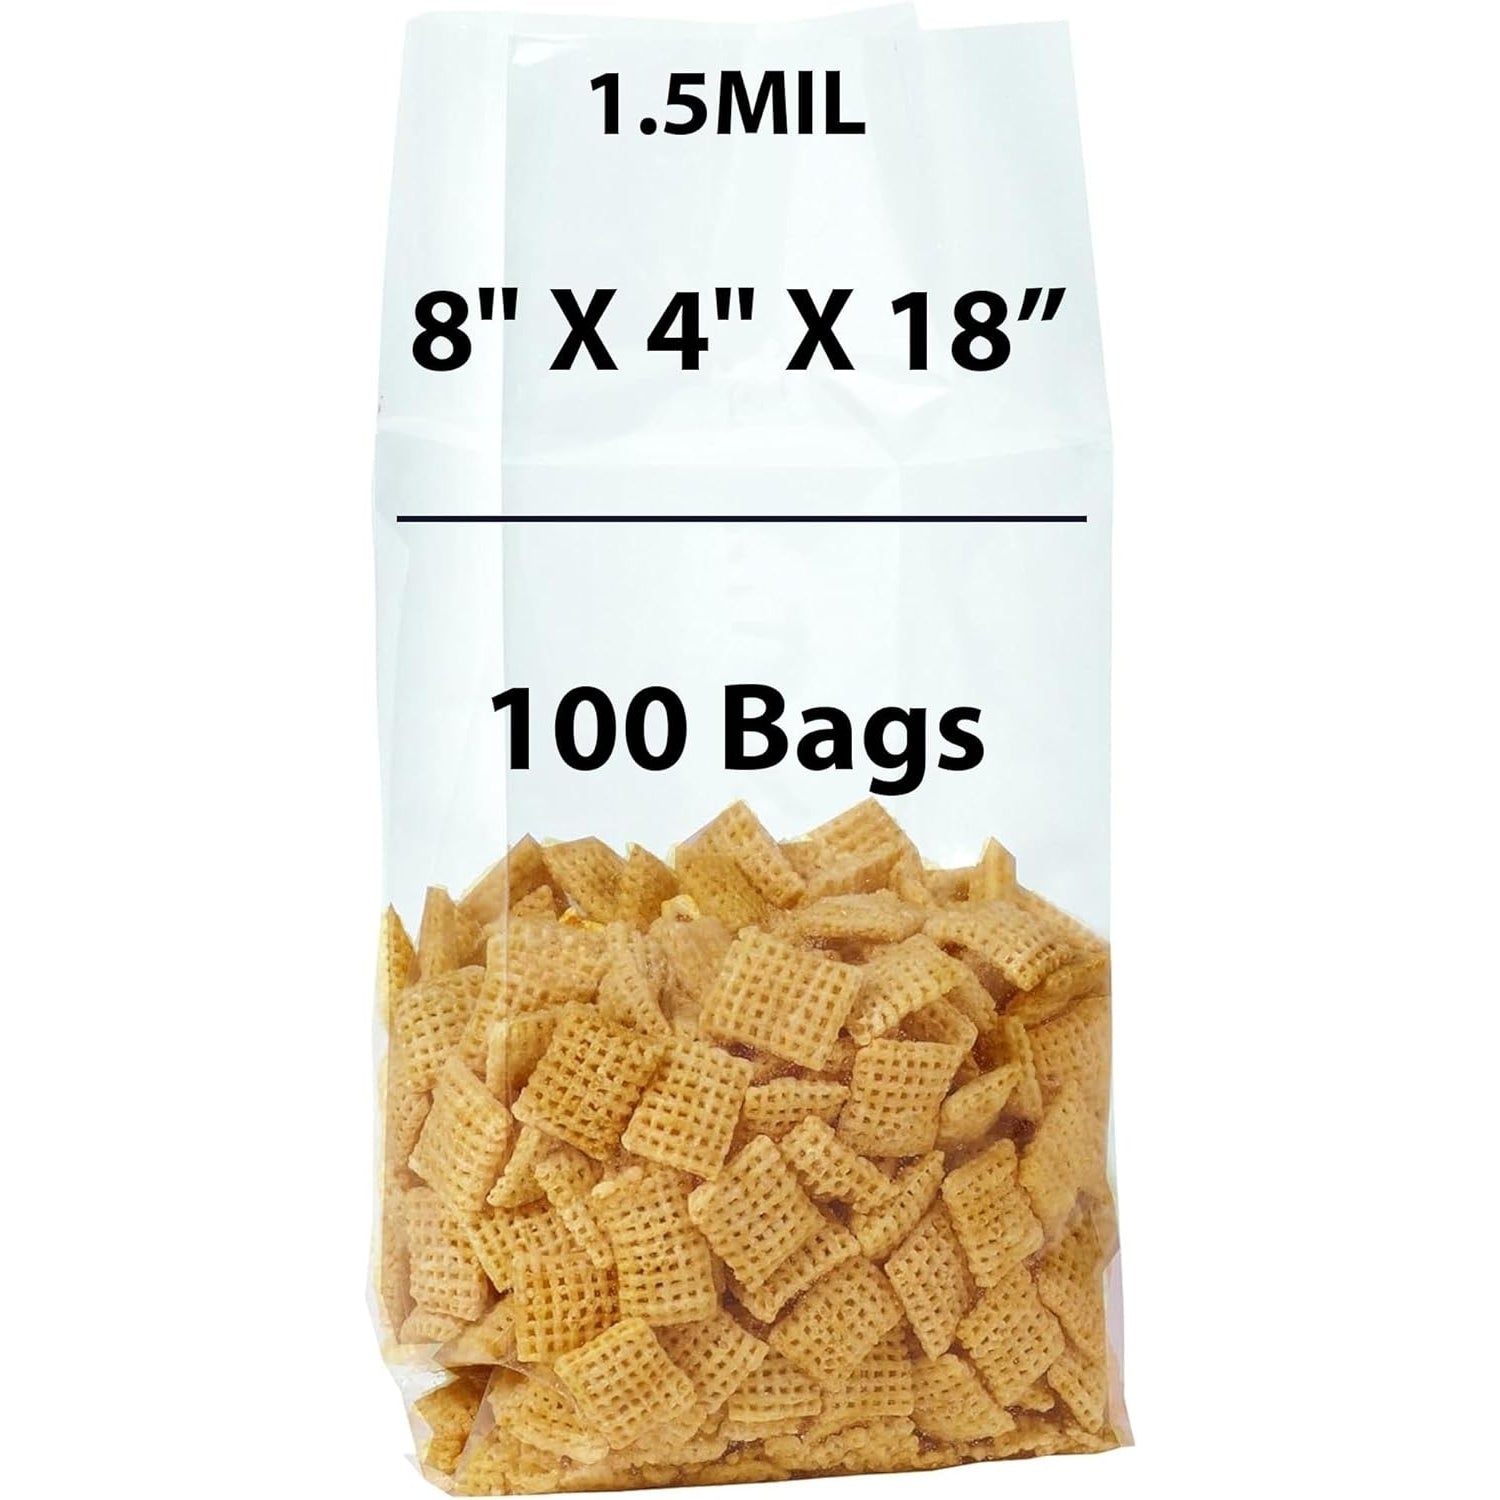 Gusseted Polypropylene Bags 1.5 Mil 8 inch X 4 inch X 18 inch Size Pack of 100 Bags